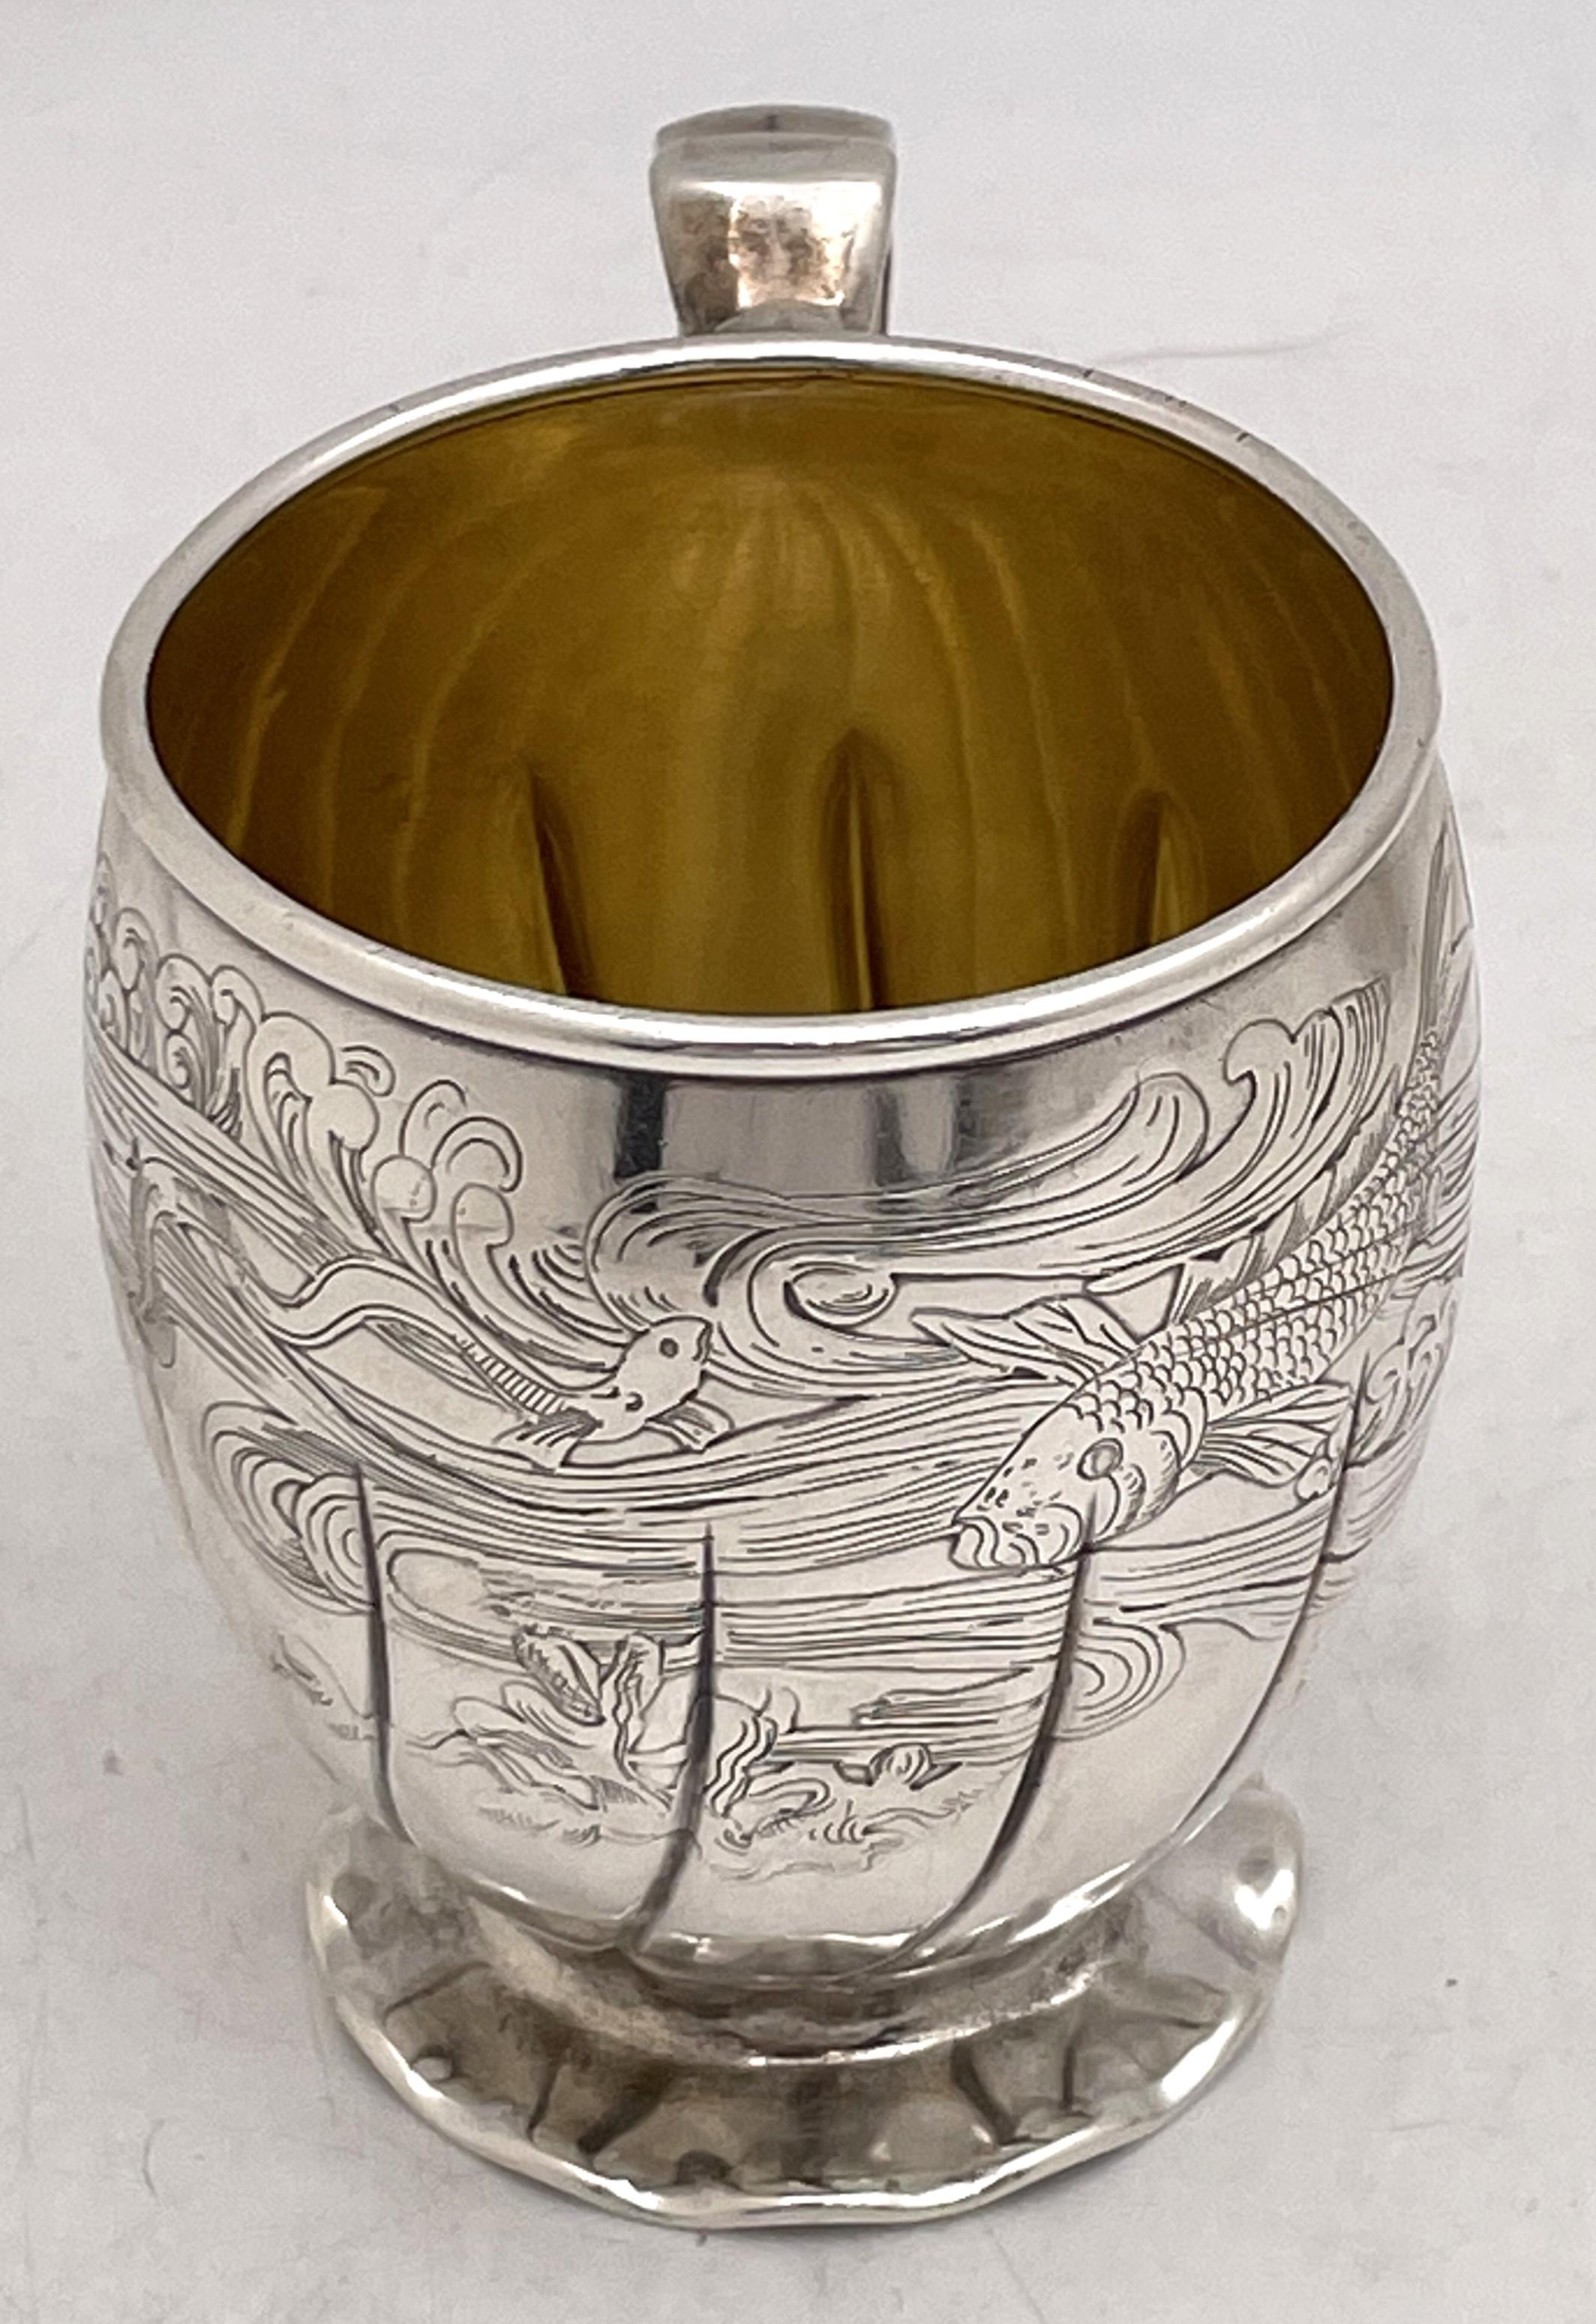 Gorham special order sterling silver child's or christening mug, made around 1880, gilt inside, adorned with acid-etched motifs including fish and waves, and in an elegant, curvilinear design. It measures 3 3/4'' in height by 2 7/8'' in diameter at